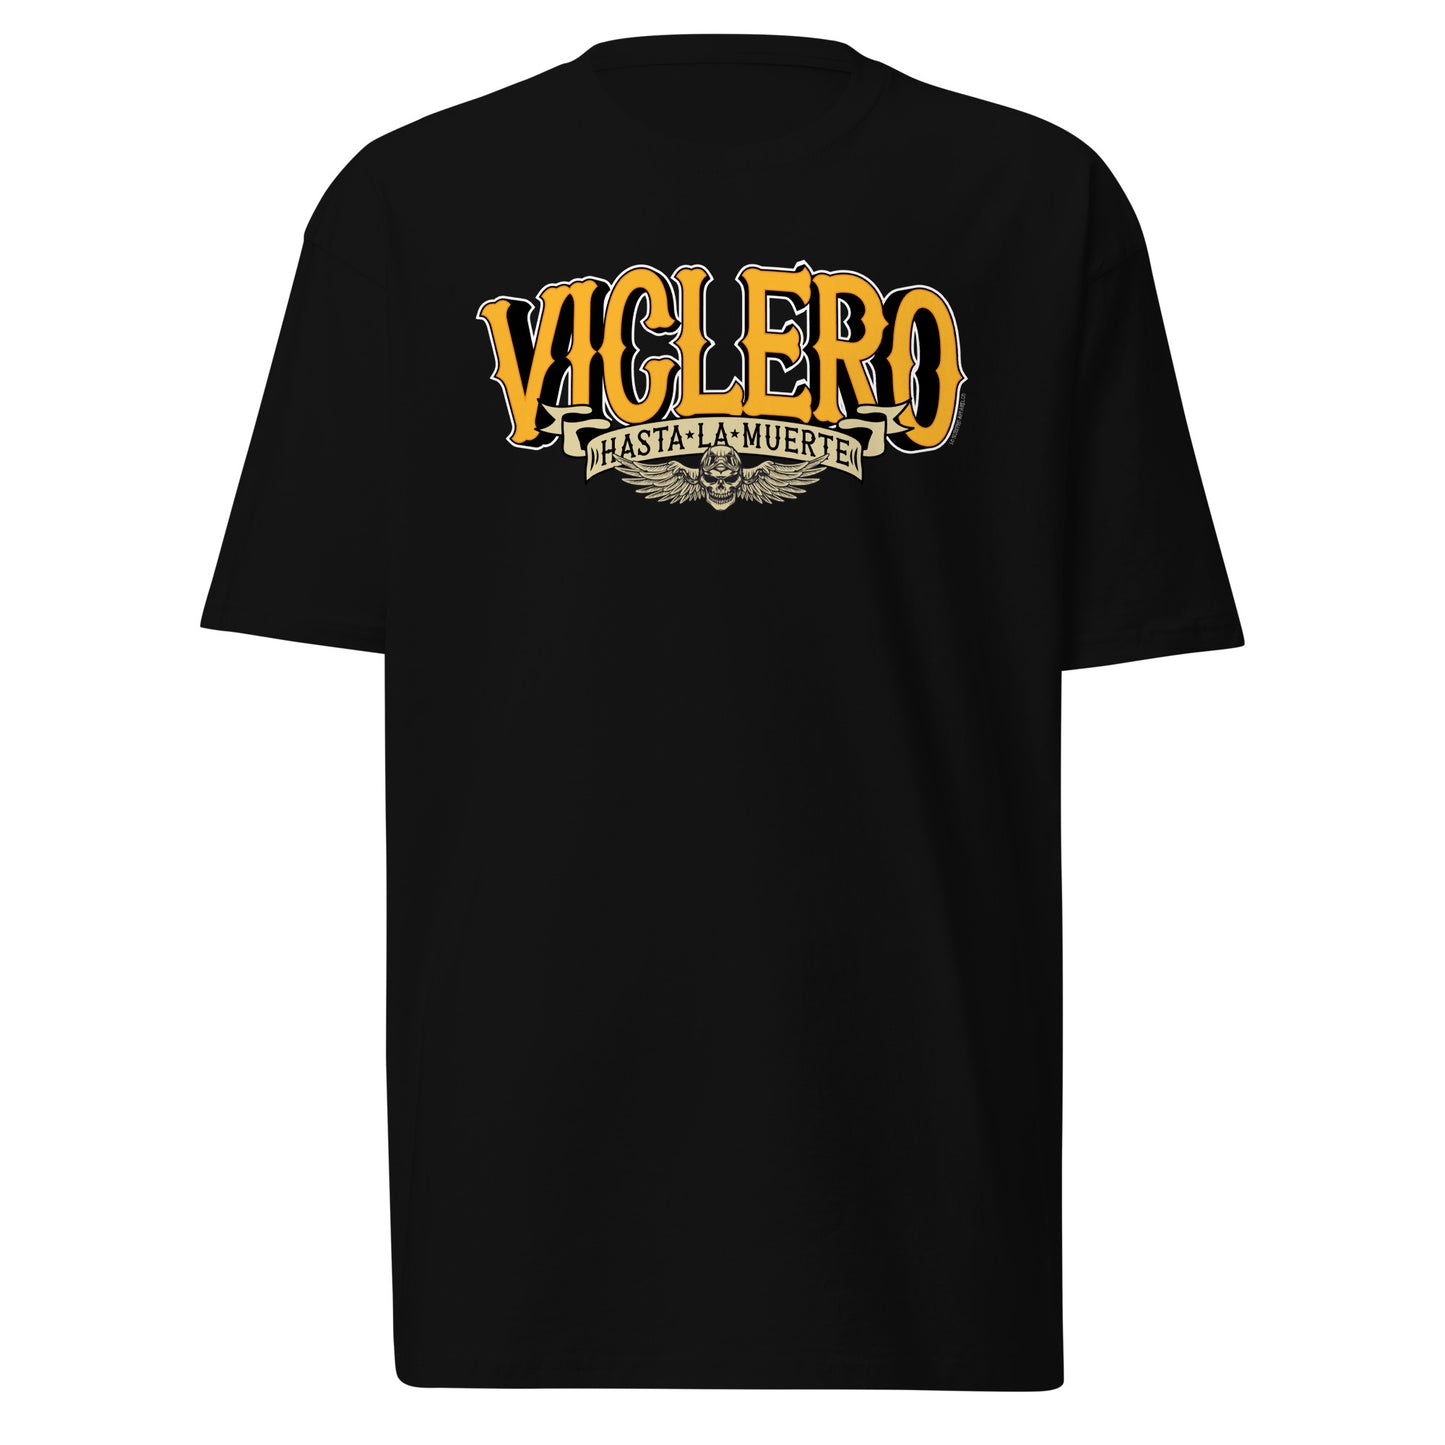 Front view of "Viclero Hasta La Muerte" T-shirt with skull and wings graphic